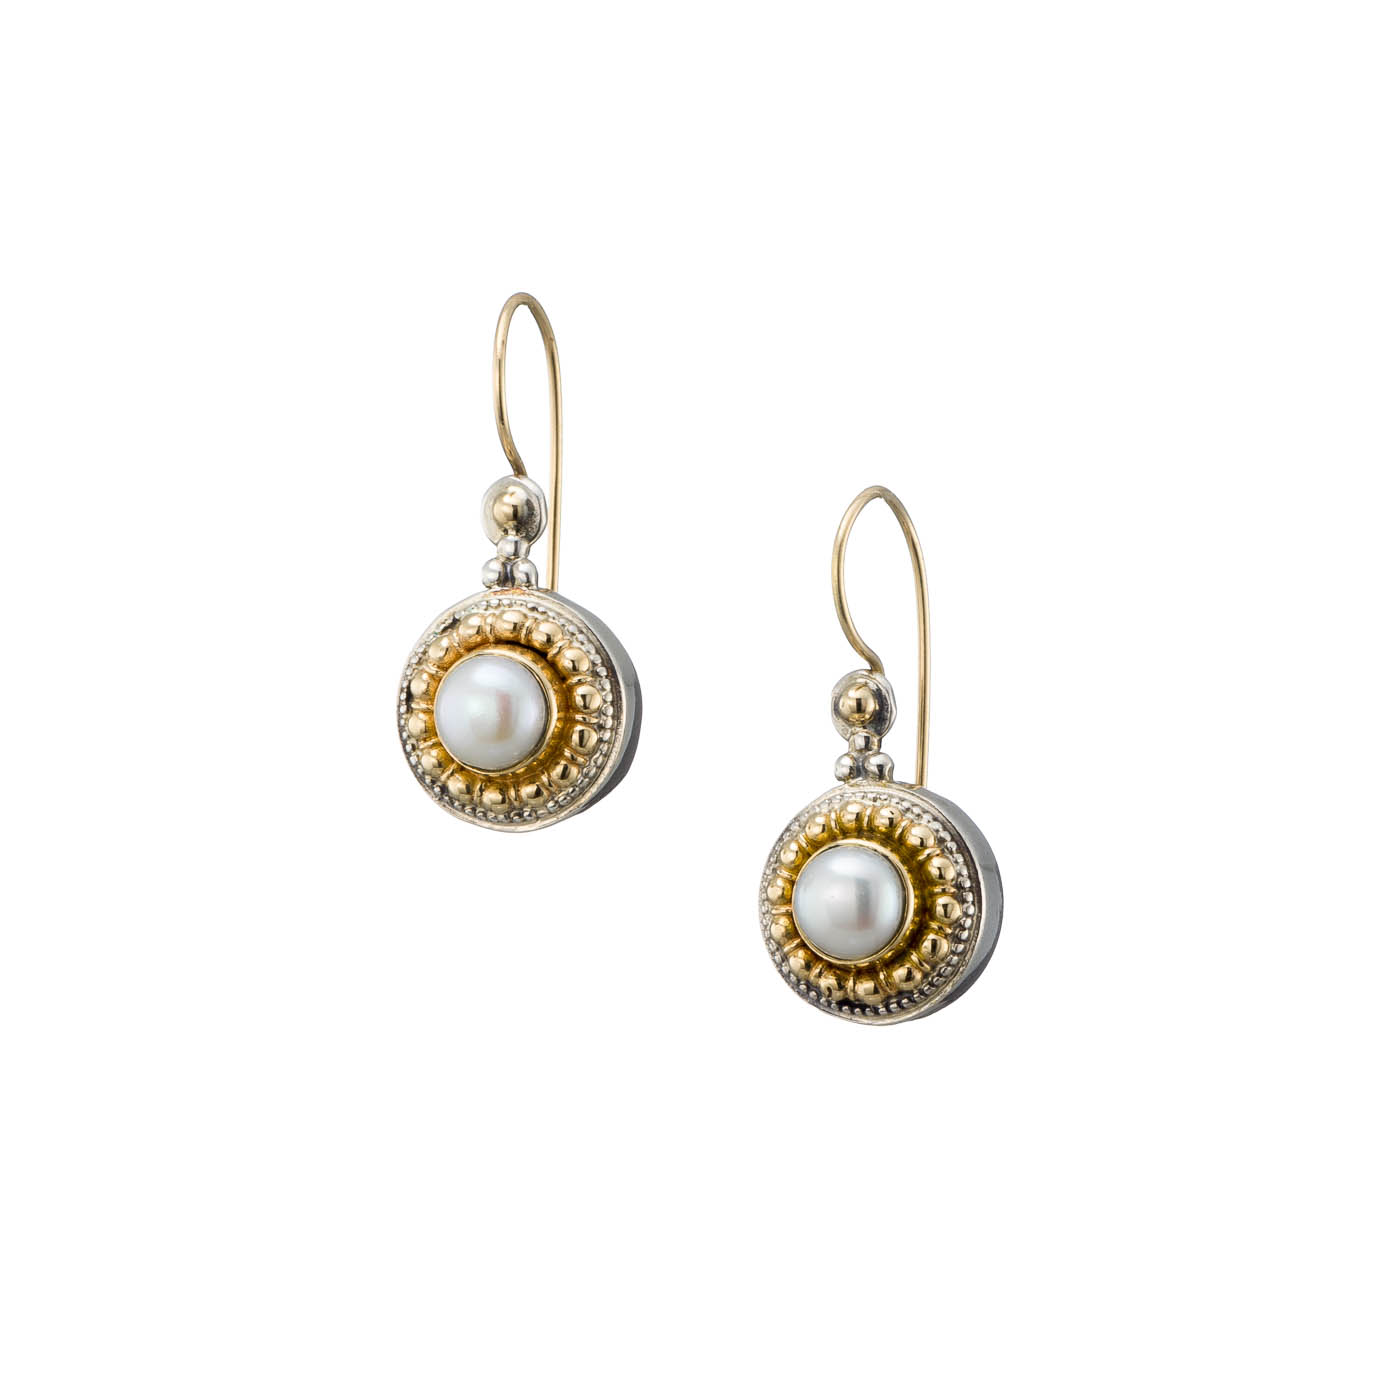 Athenian flowers round earrings in 18K Gold and sterling silver with pearls